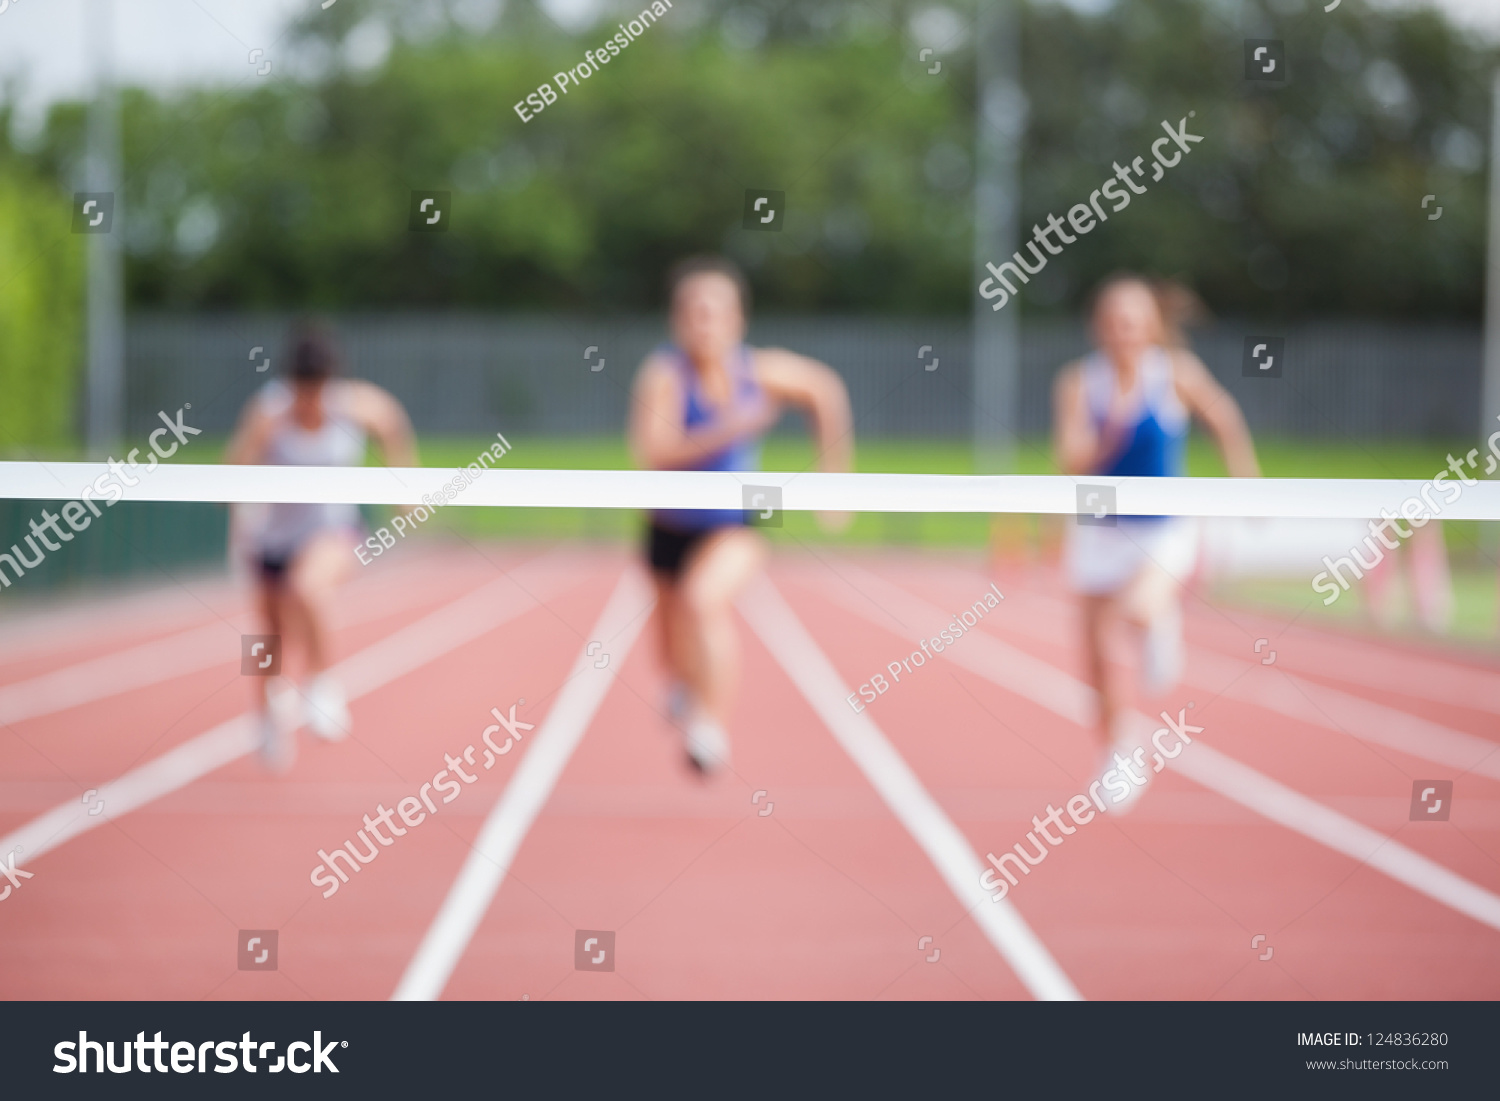 Portrait Of Female Athlete In Ready To Run Position Stock 